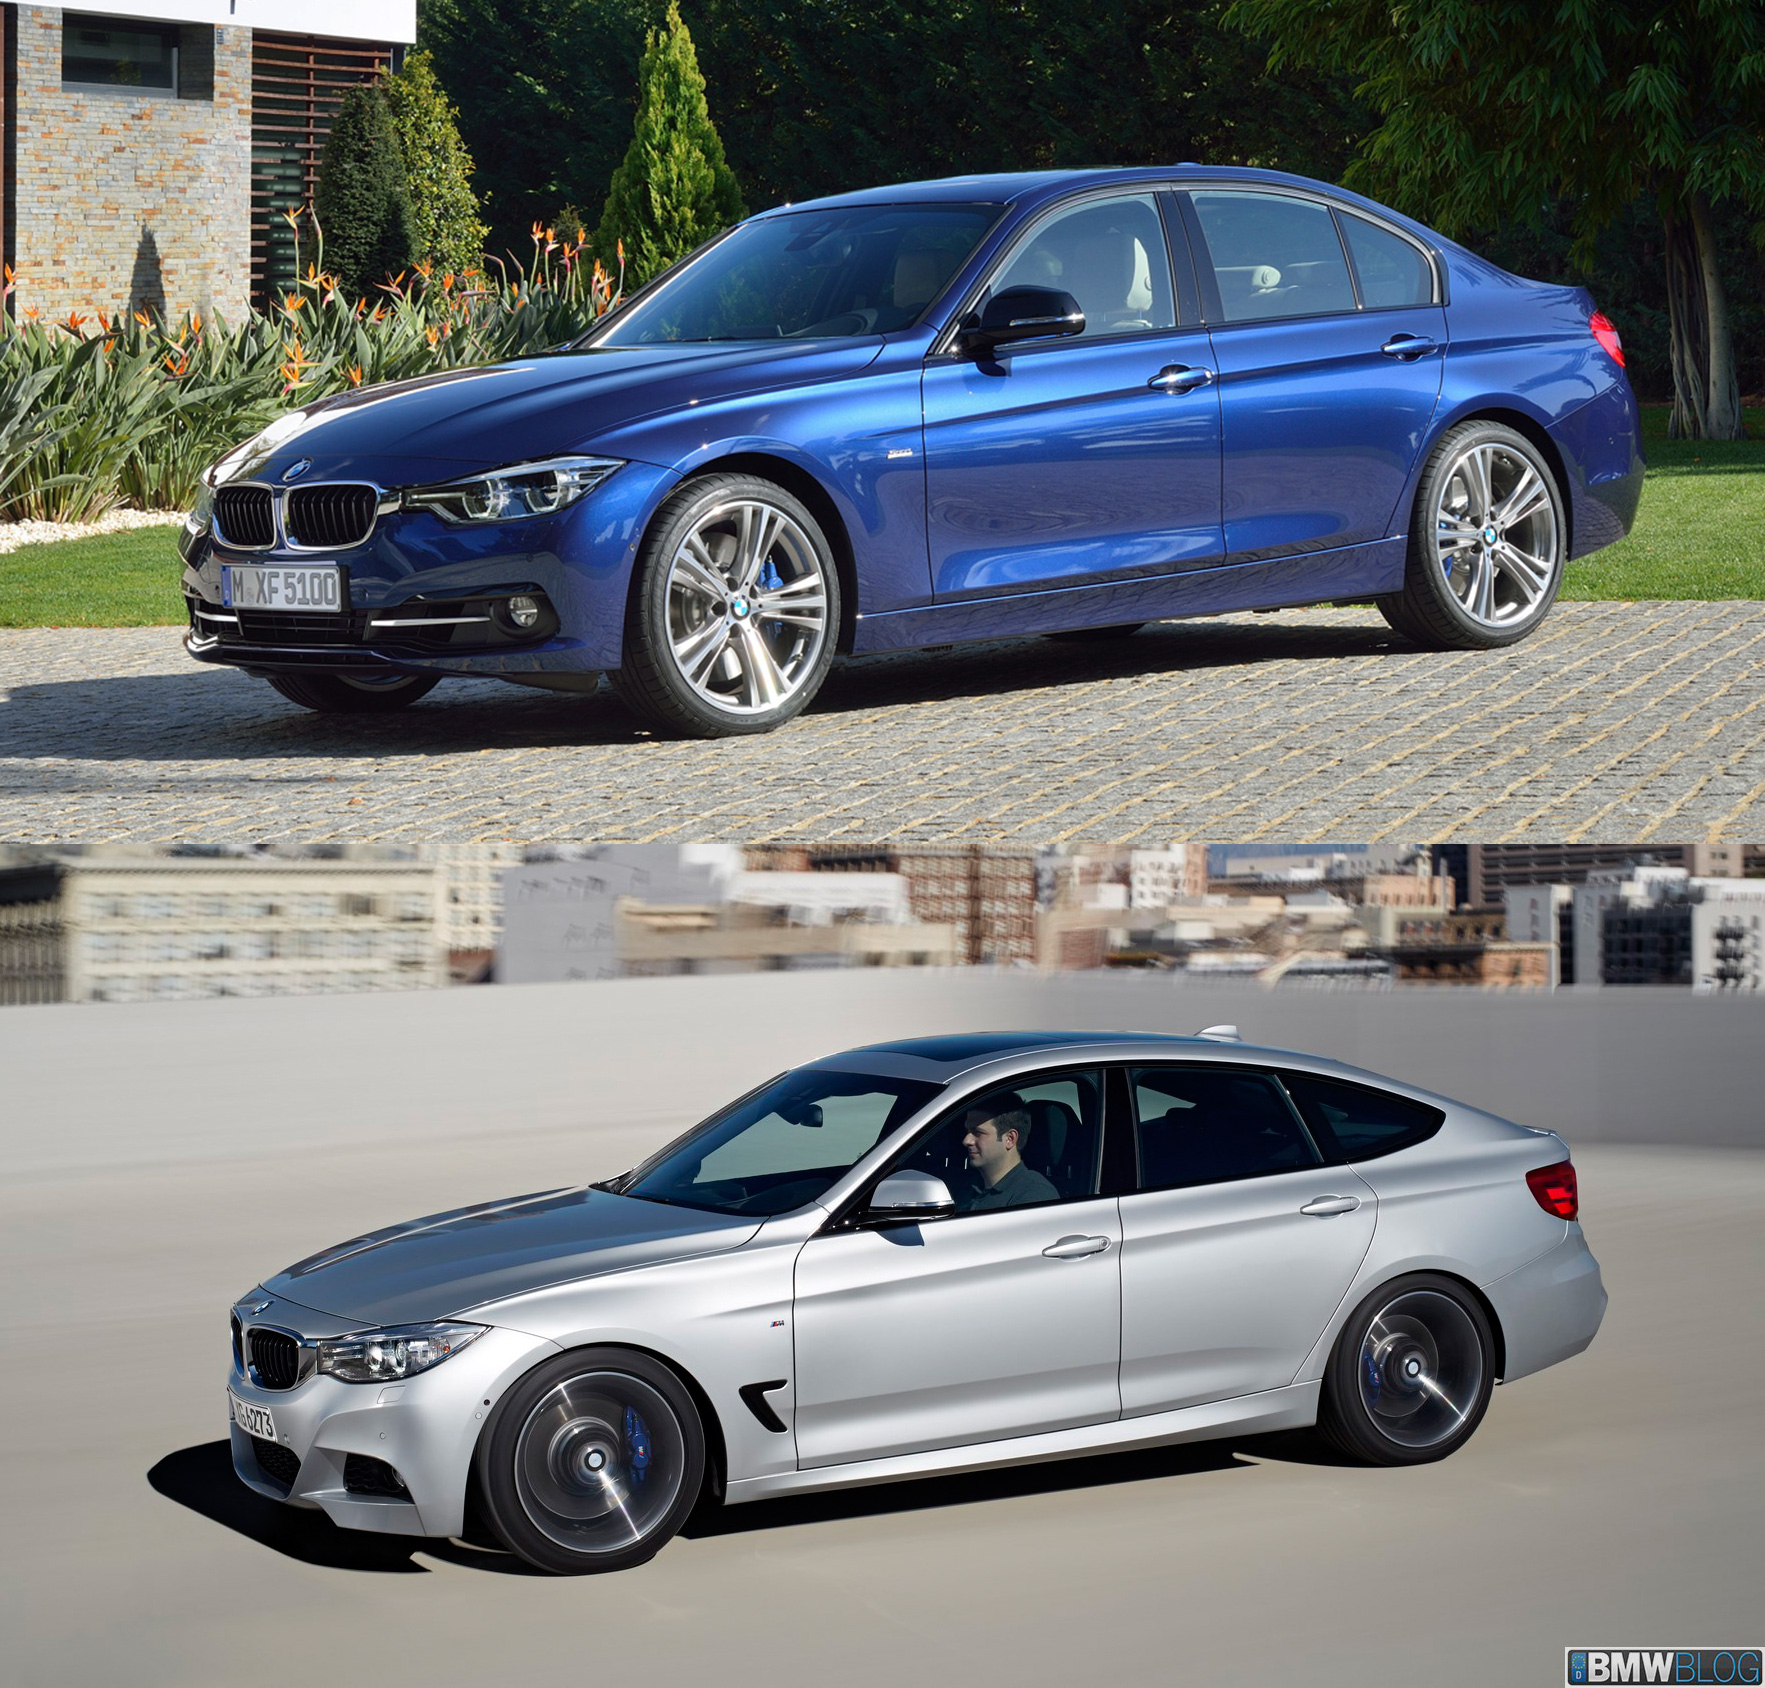 Amazing BMW 3 Series Gran Turismo Pictures & Backgrounds